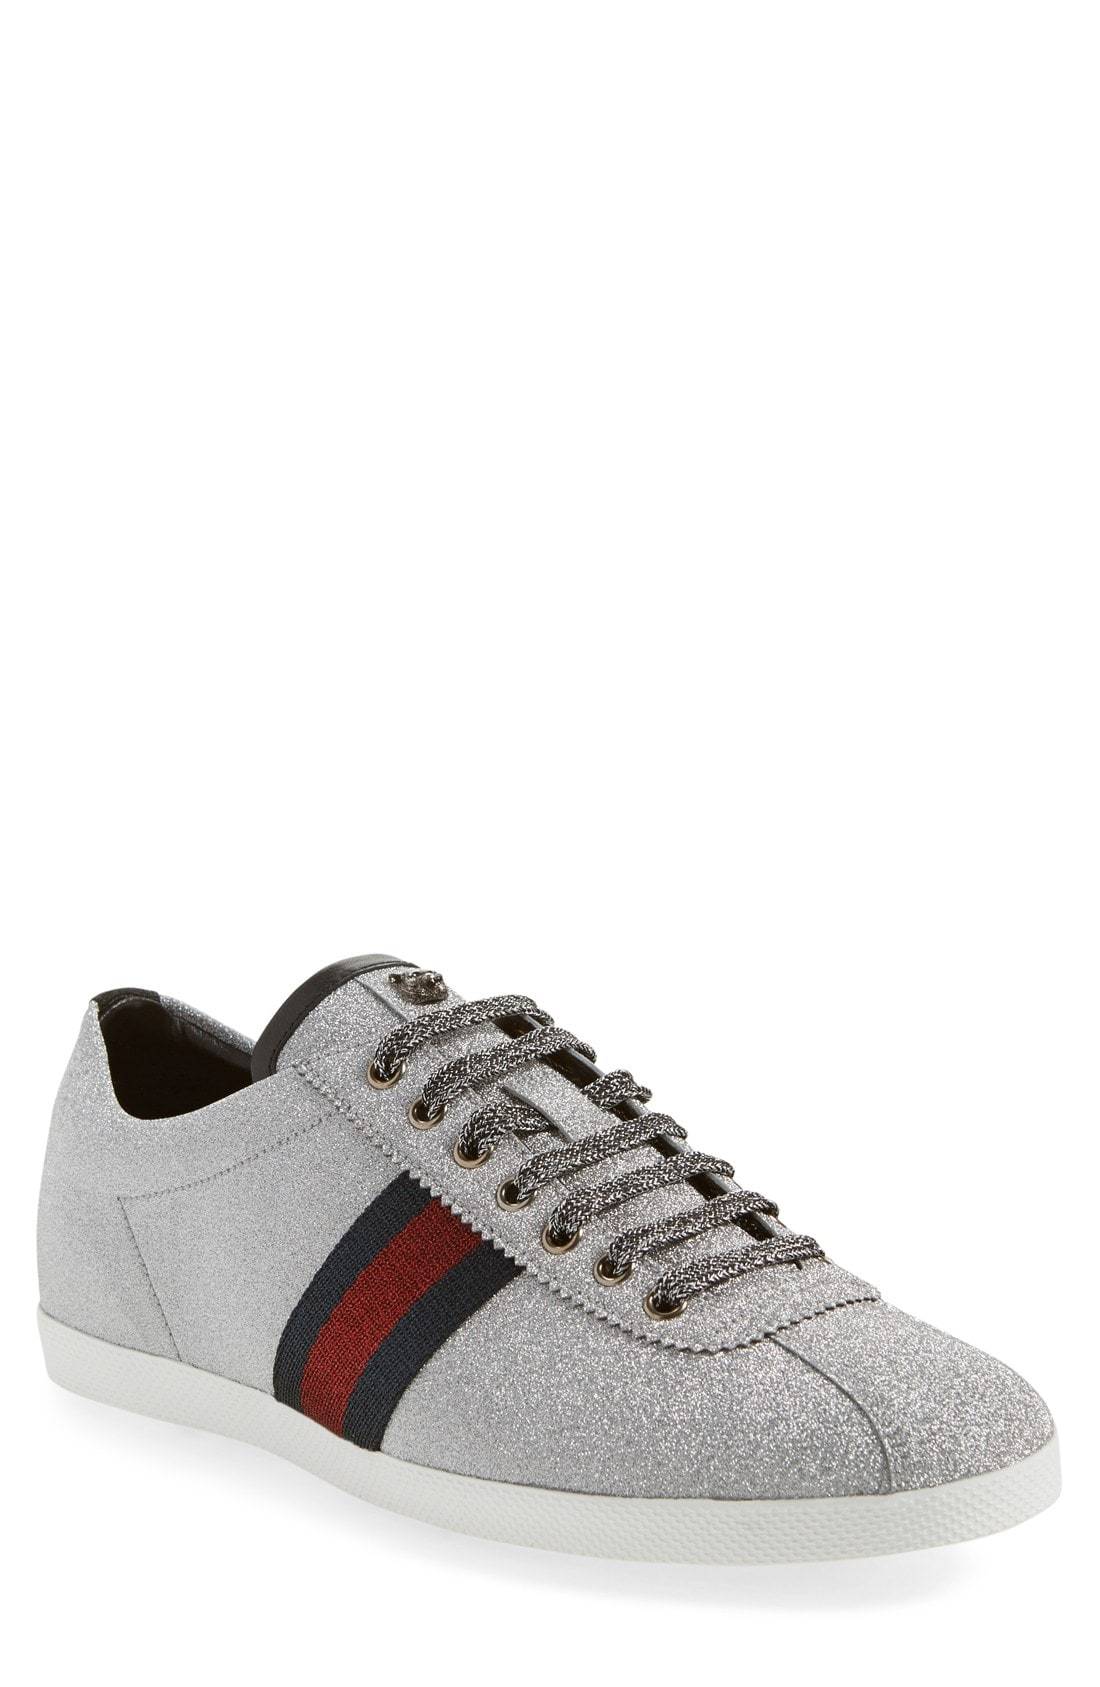 Gucci Bambi Lace Up Sneaker, $730 